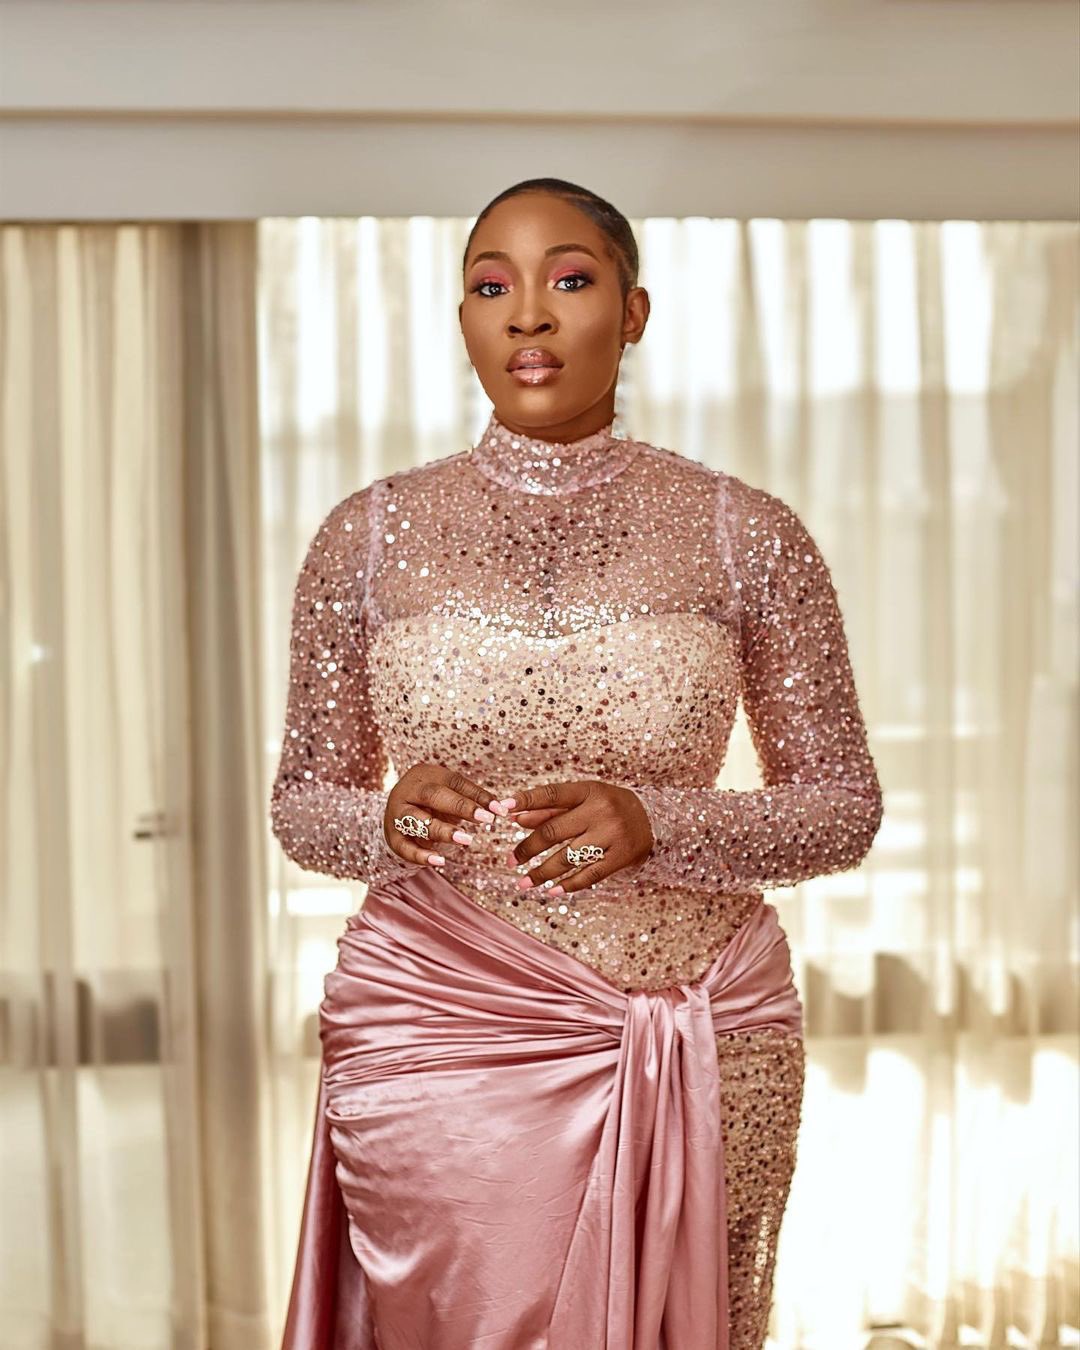 These are the best beauty looks at the Africa Magic Viewers’ Choice Awards looks worn by Nollywood celebrities. Here are the best makeup looks at The Africa Magic Viewers’ Choice Awards 2022,. Best Africa Magic Viewers’ Choice Awards 2022 Africa Magic Viewers’ Choice Awards 2022 outfits full list, worst Africa Magic Viewers’ Choice Awards 2022, Africa Magic Viewers’ Choice Awards 2022 red carpet. amvca meaning, amvca 2022 nominations, amvca 2022 dates, amvca 2022 nominees list, amvca 2022 nominees and winners, amvca 2022 date and time, amvca best dressed 2022, amvca 2022 winners list, amvca 2022 best dressed male, amvca 2022 venue.